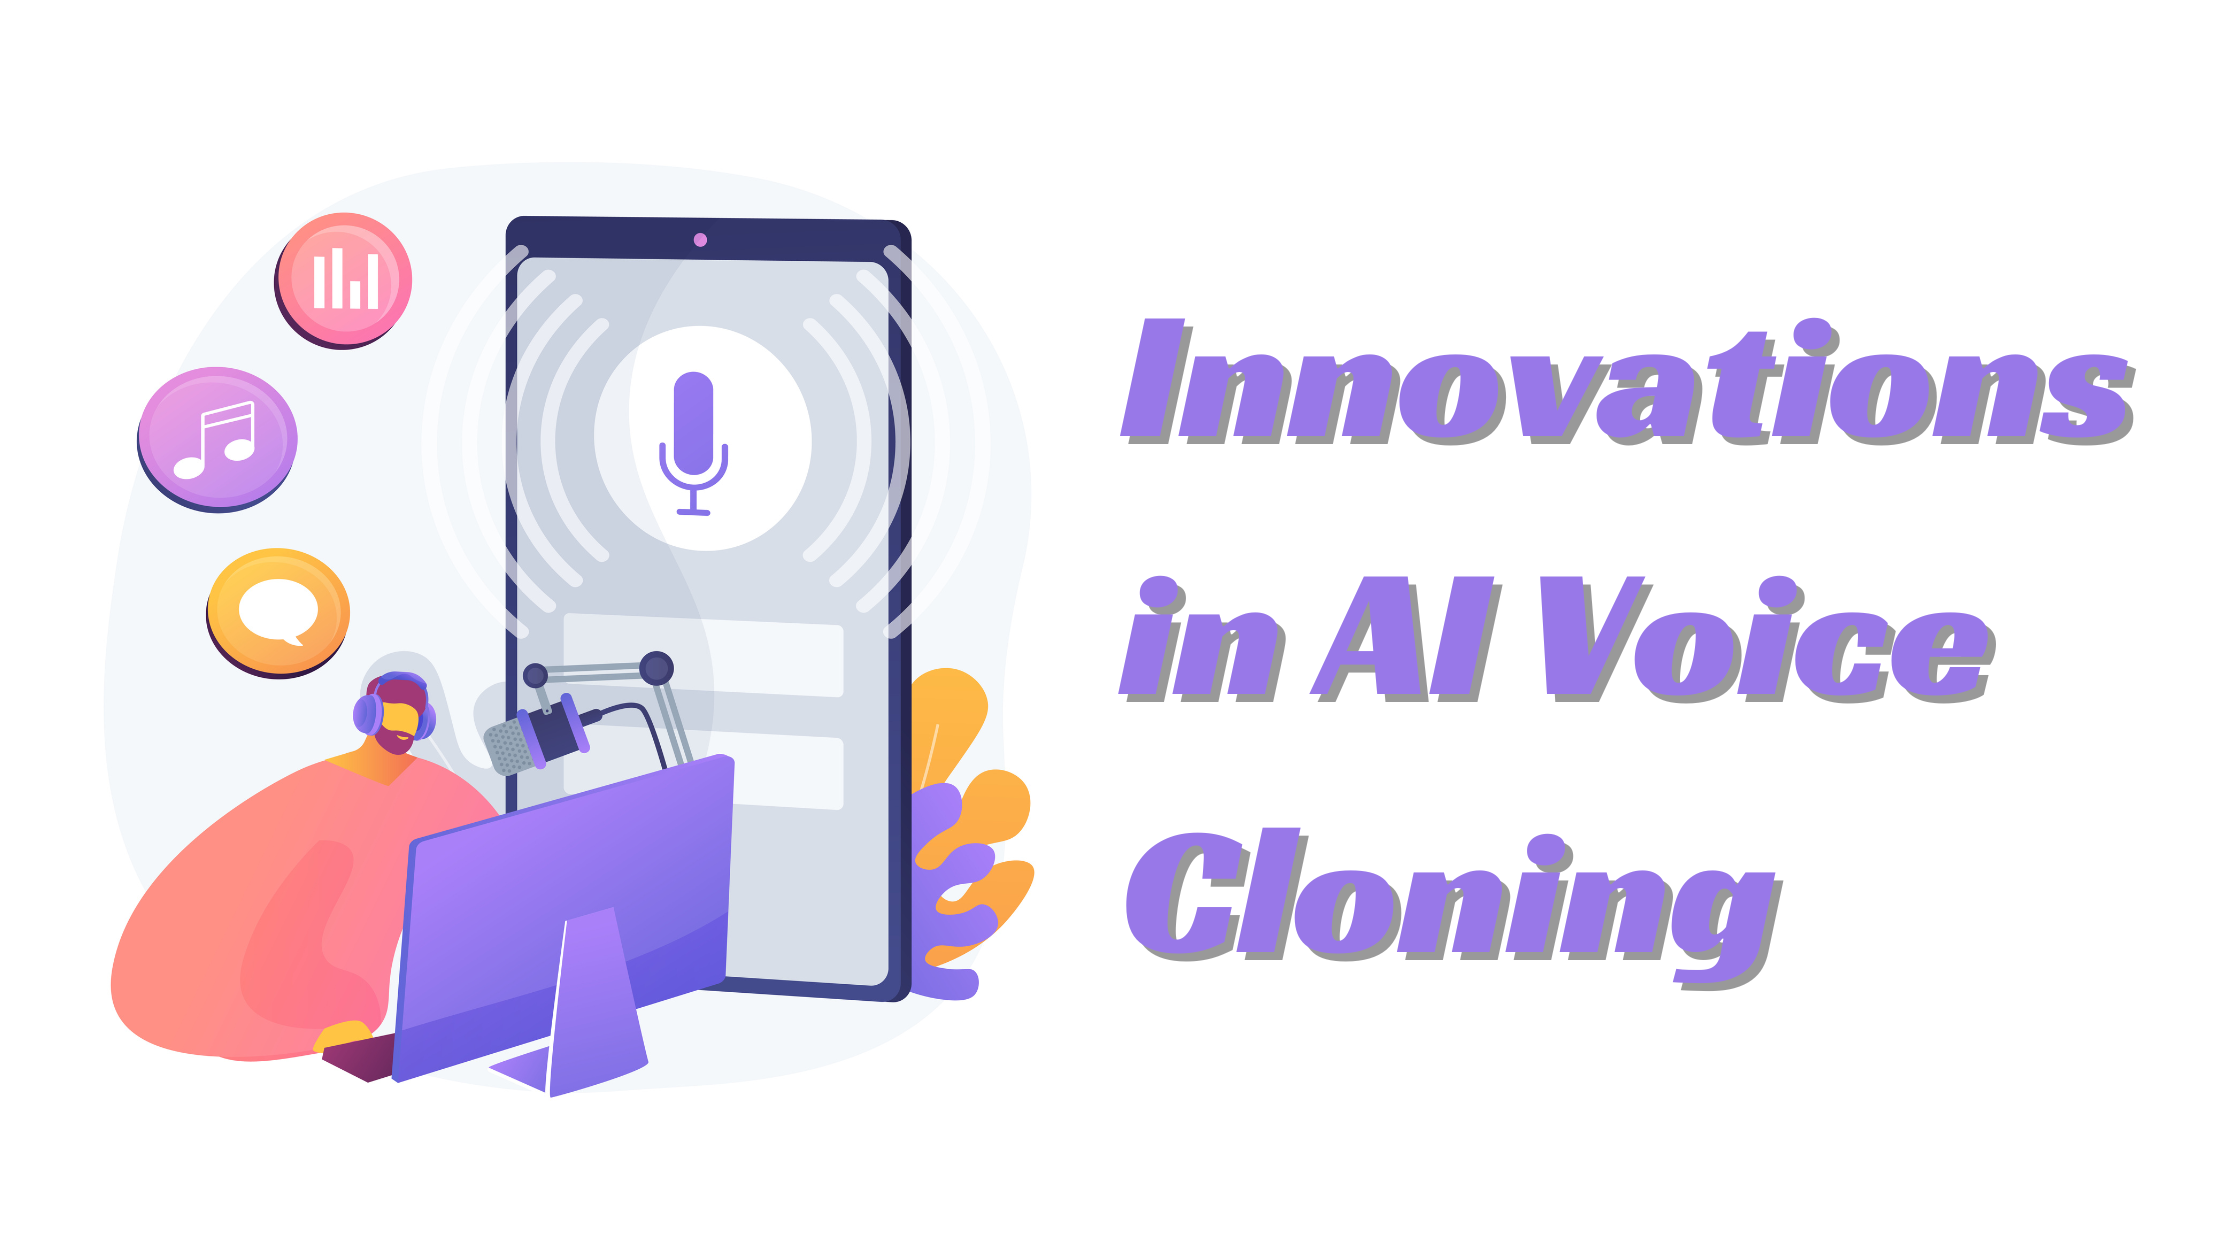 Innovations in AI Voice Cloning